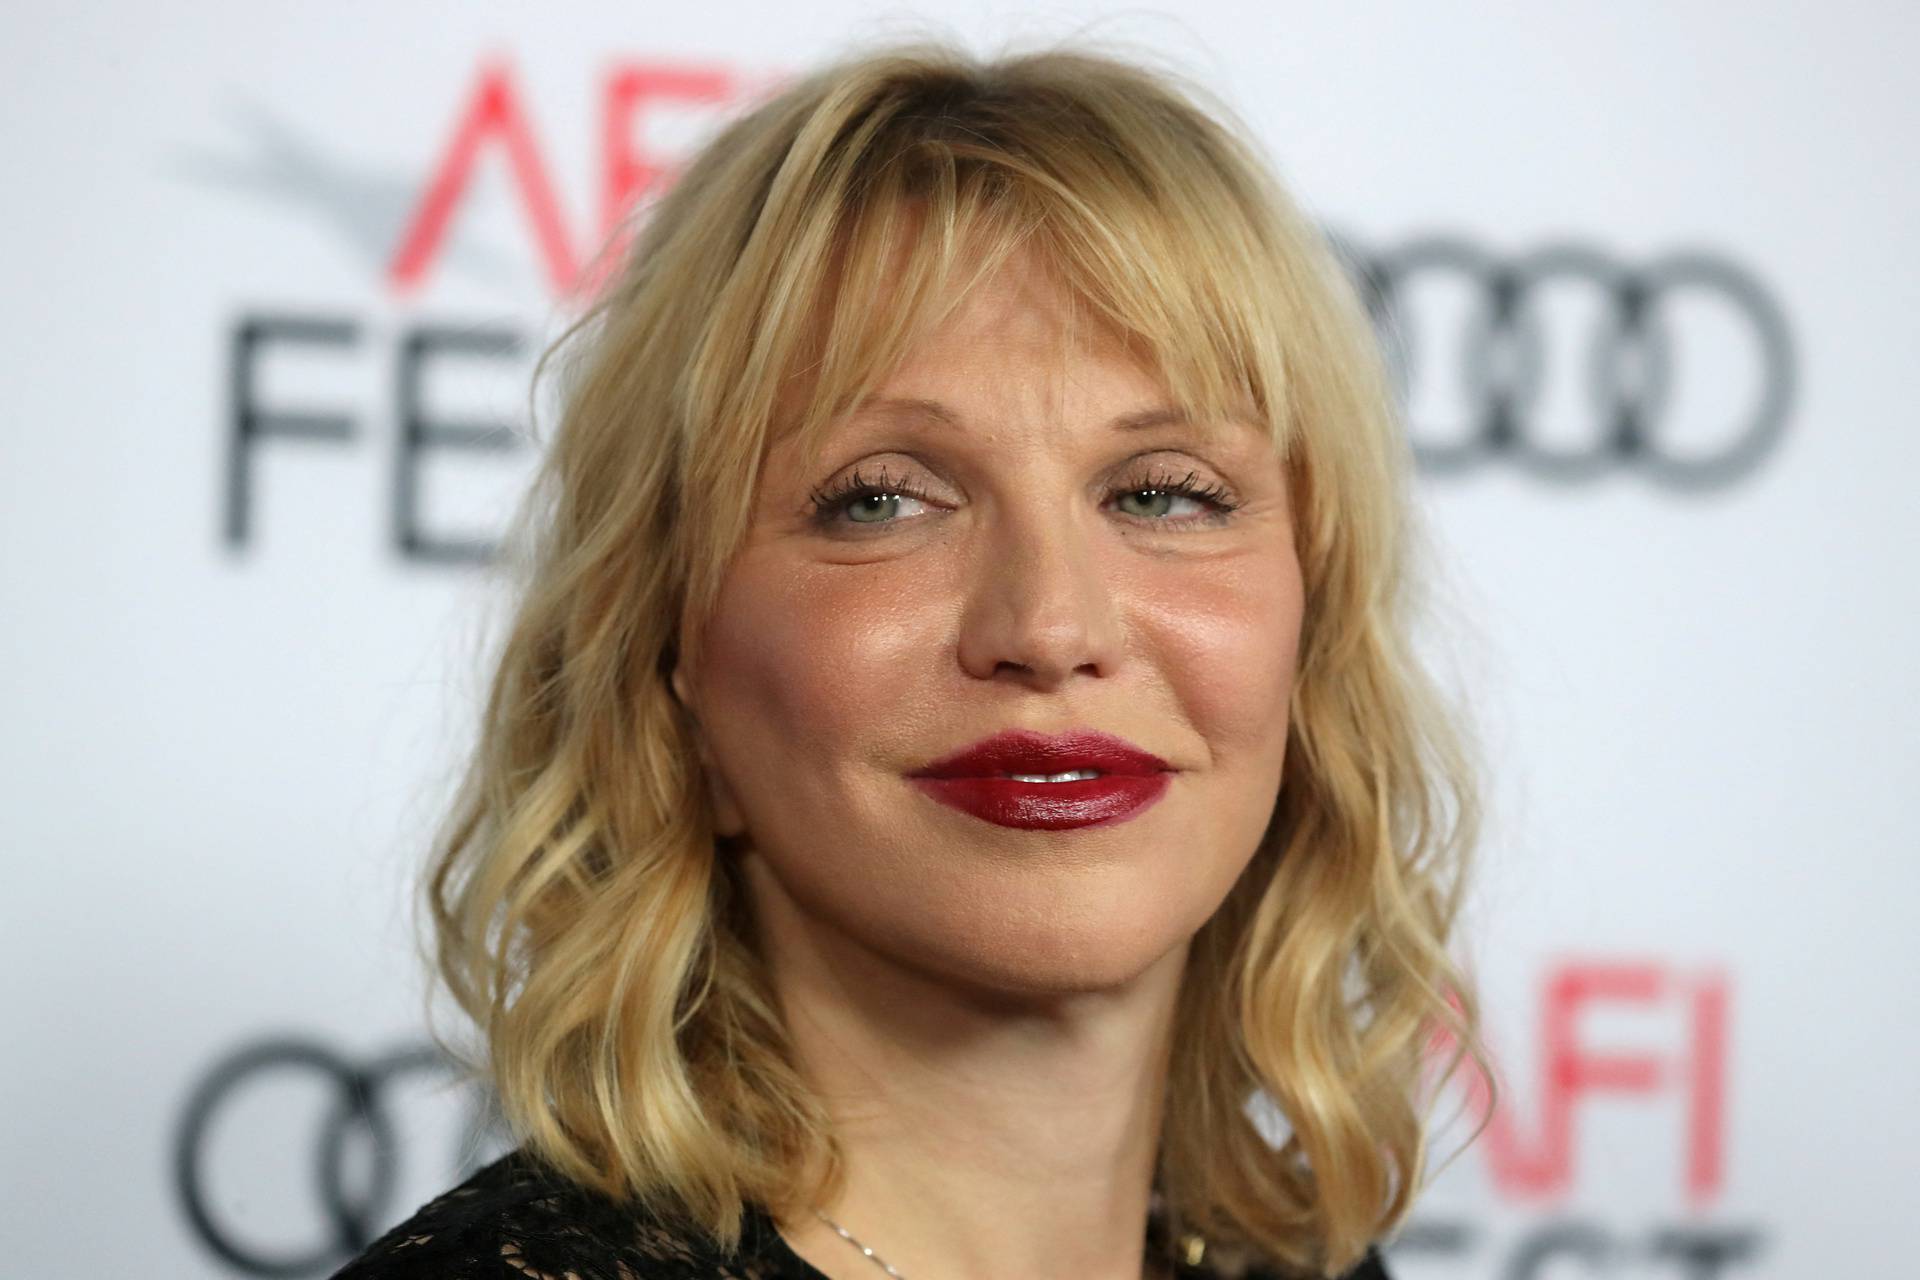 FILE PHOTO: Courtney Love arrives for the gala presentation of "The Disaster Artist" at the AFI Film Festival in Los Angeles